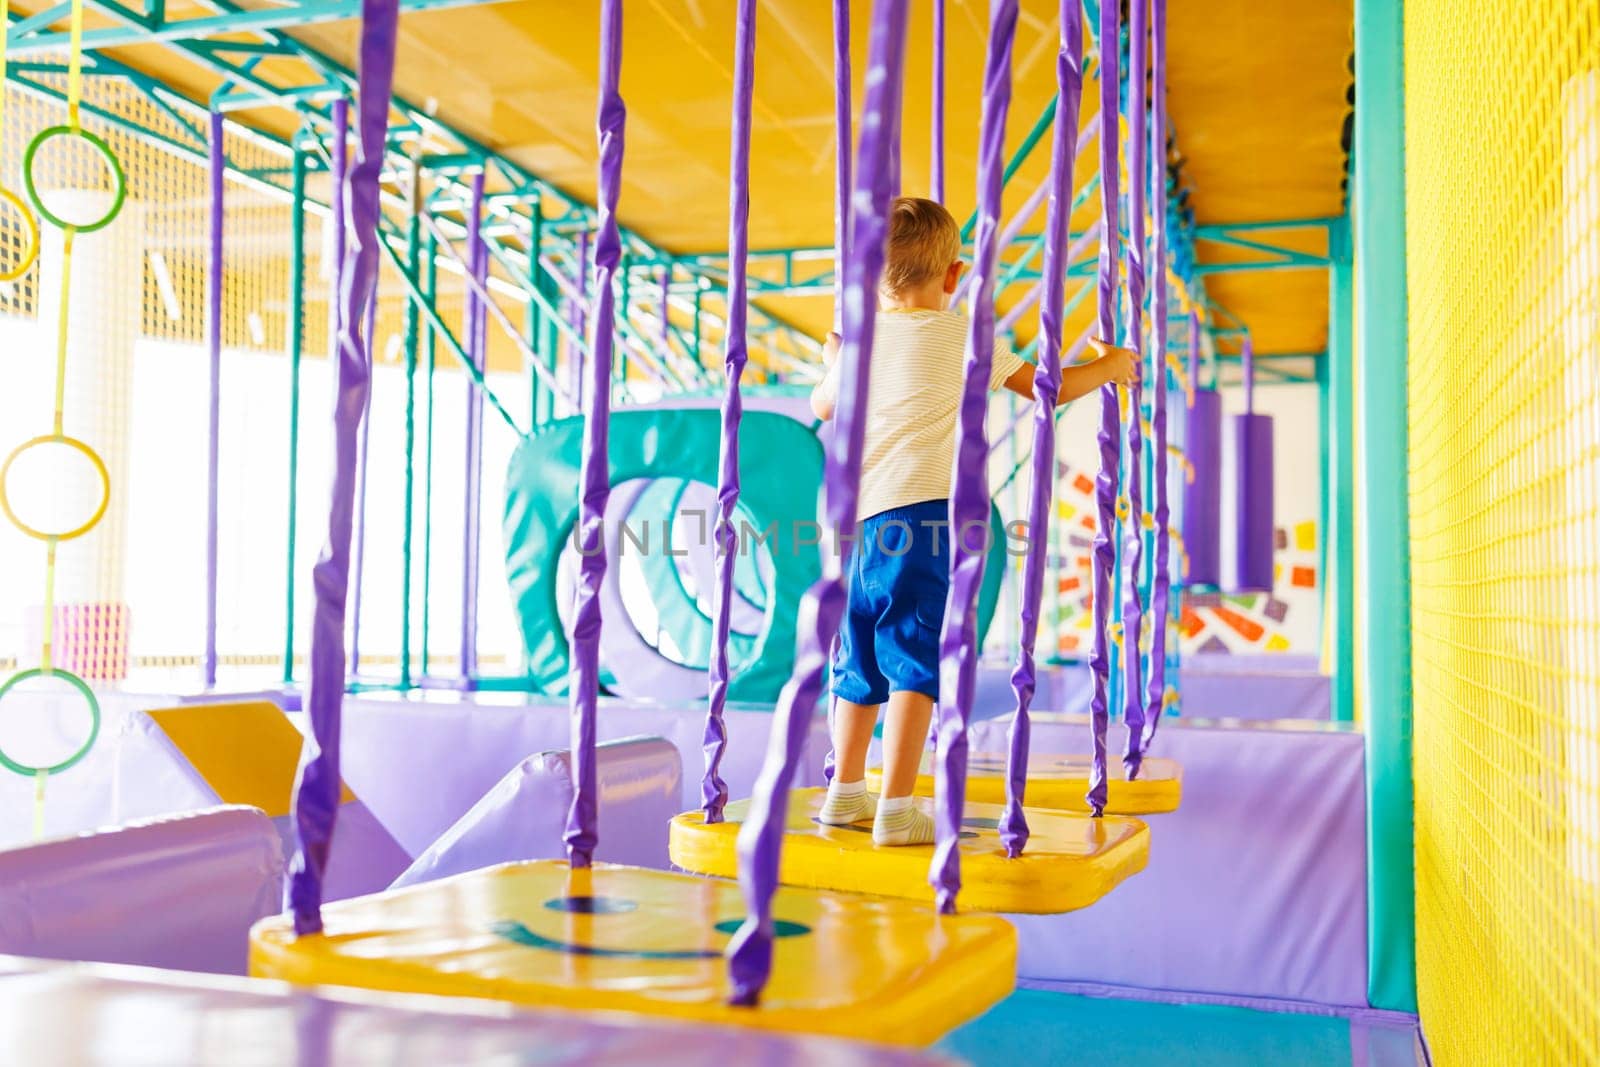 Child navigating through purple and yellow play structure in indoor playground. Brightly colored play area for kids with obstacle course. Child activity and playtime concept for design and print. Indoor entertainment